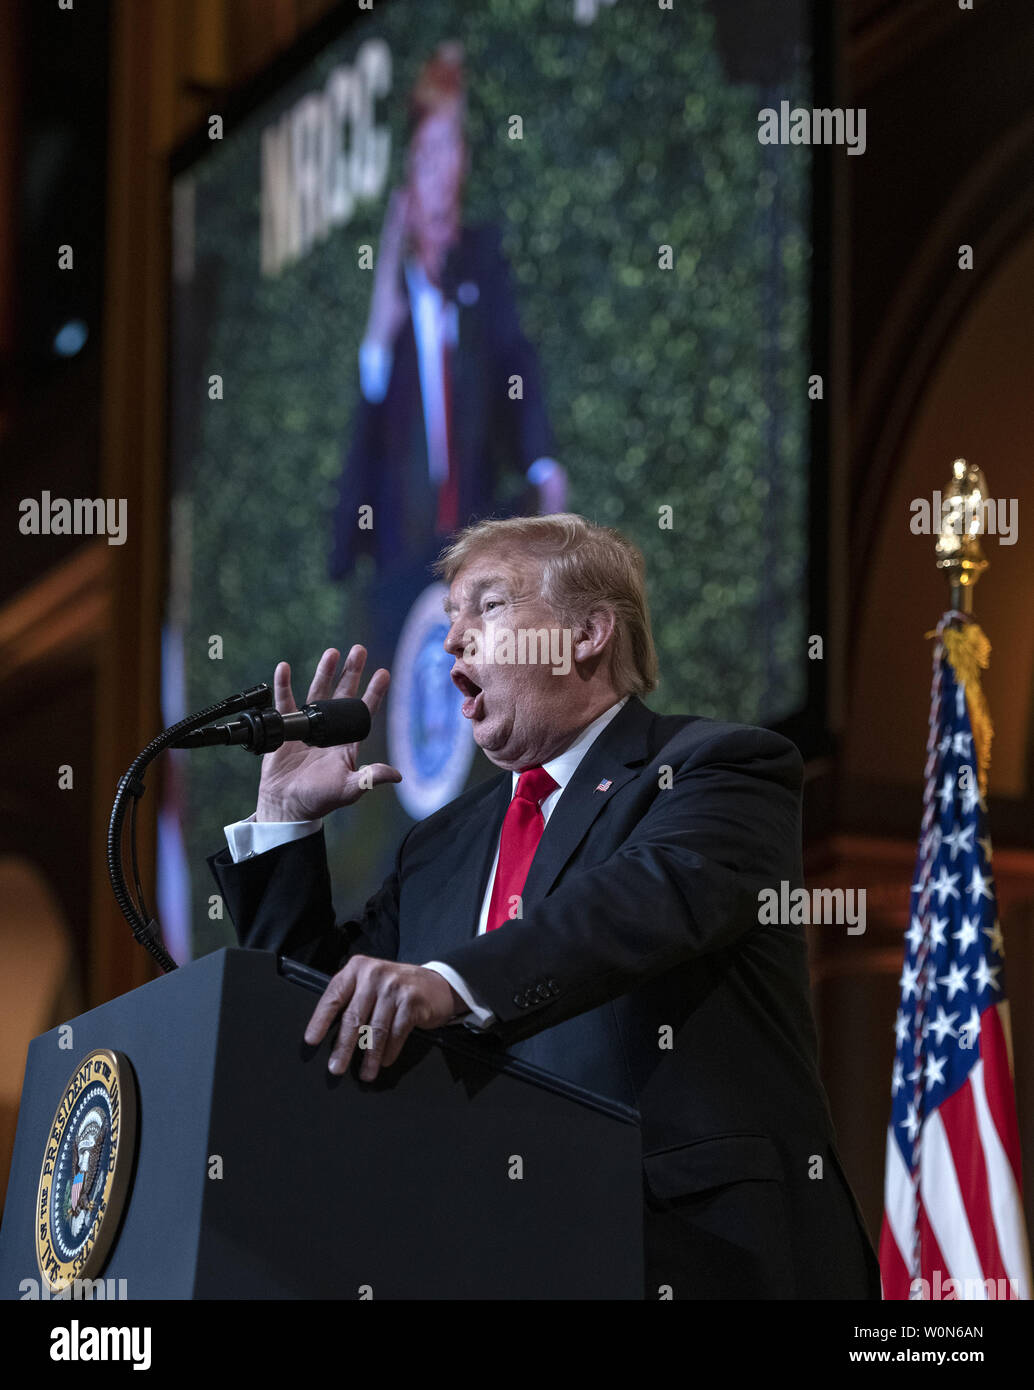 United States President Donald J. Trump delivers remarks at the National Republican Congressional Committee (NRCC) Spring Dinner at the National Building Museum in Washington, DC on April 2, 2019. Photo by Ron Sachs/UPI Stock Photo